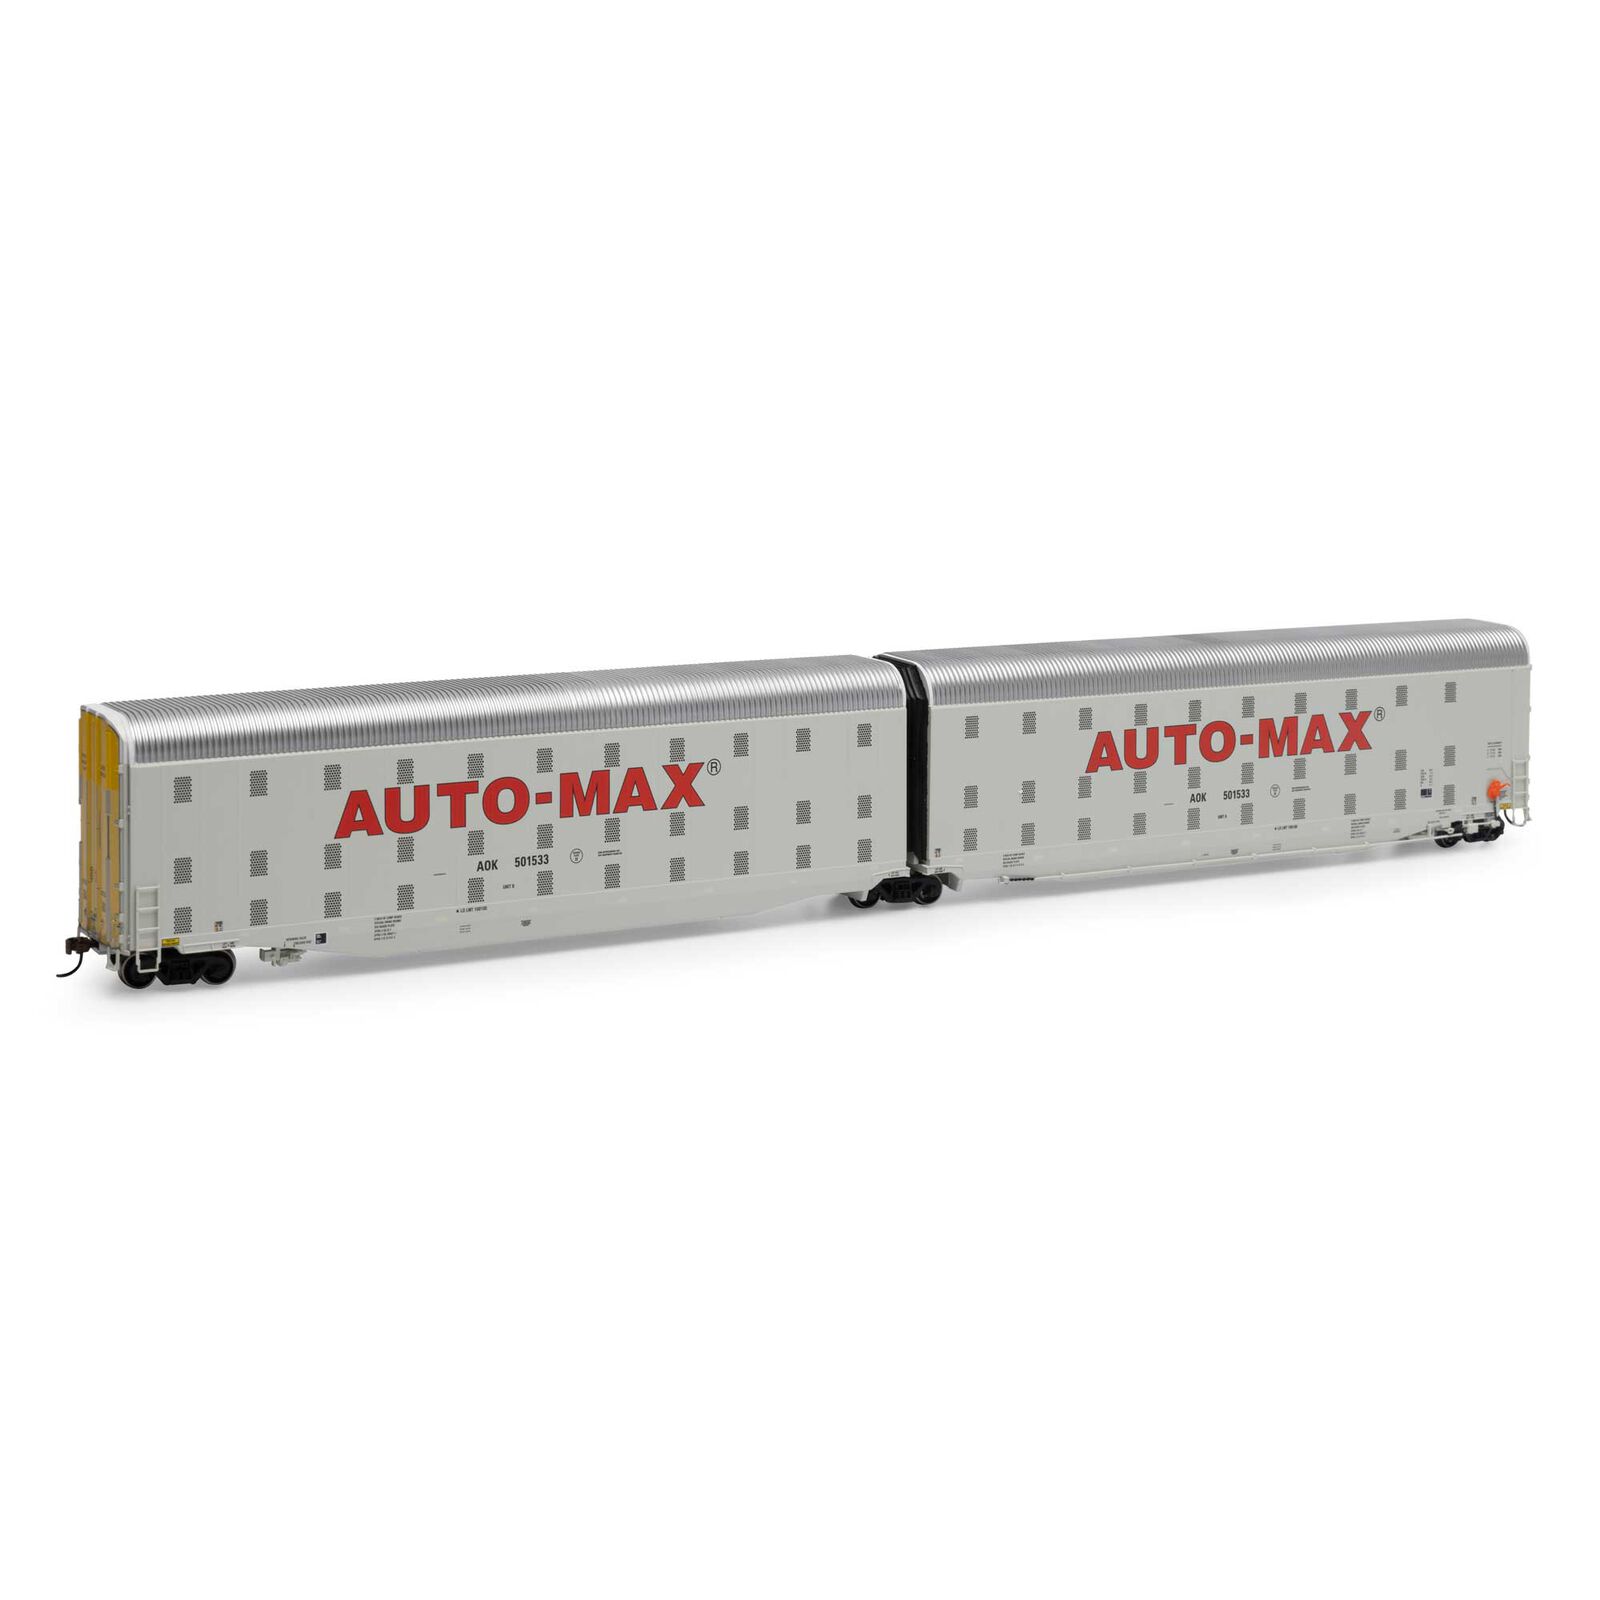 HO Auto-Max Carrier, AOK #501533